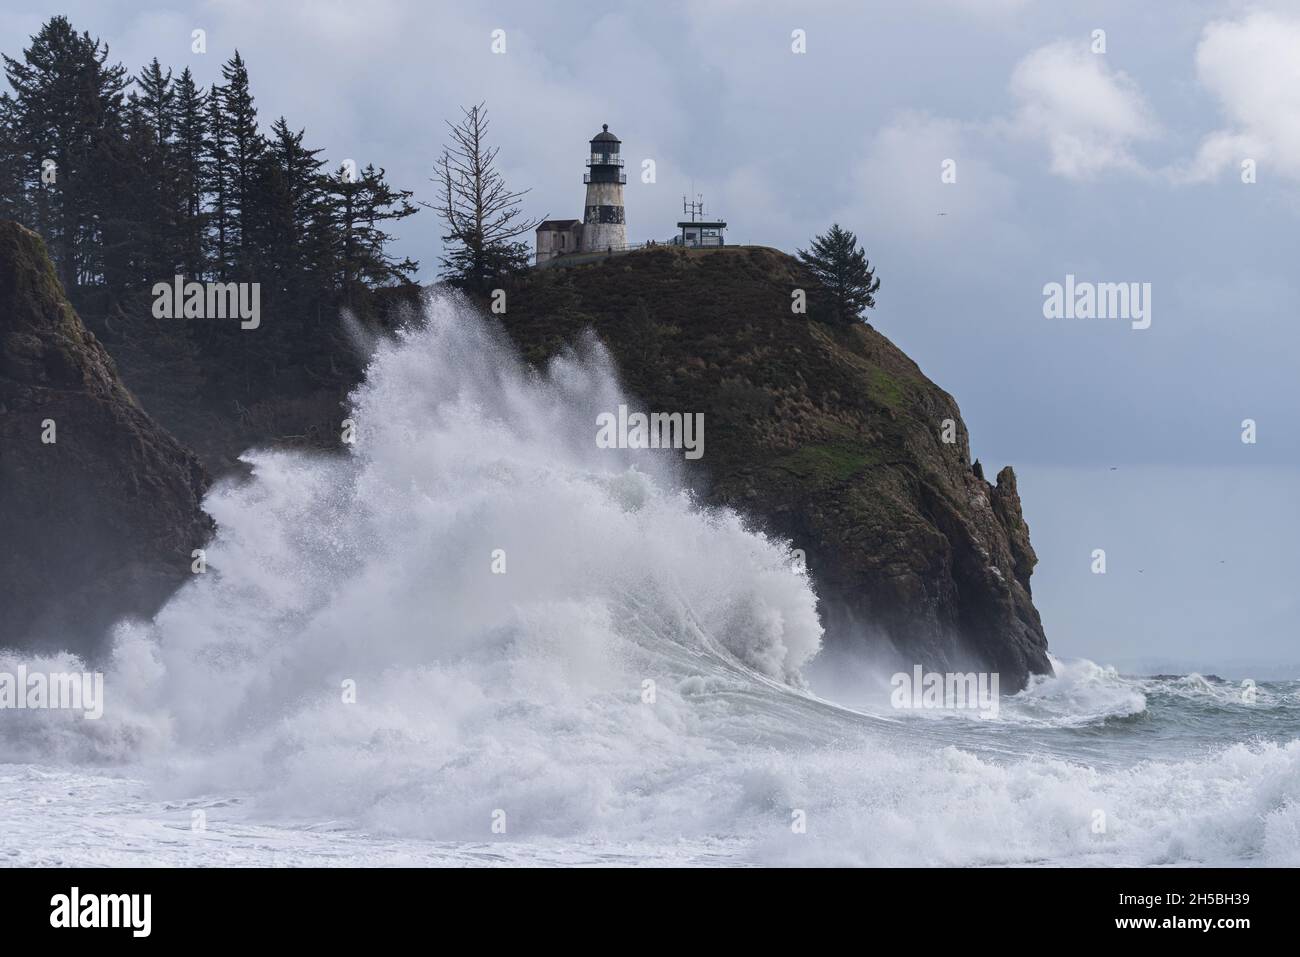 Massive crashing waves and powerful surf during king tide storm on the Washington Coast, Cape Disappointment State Park Stock Photo